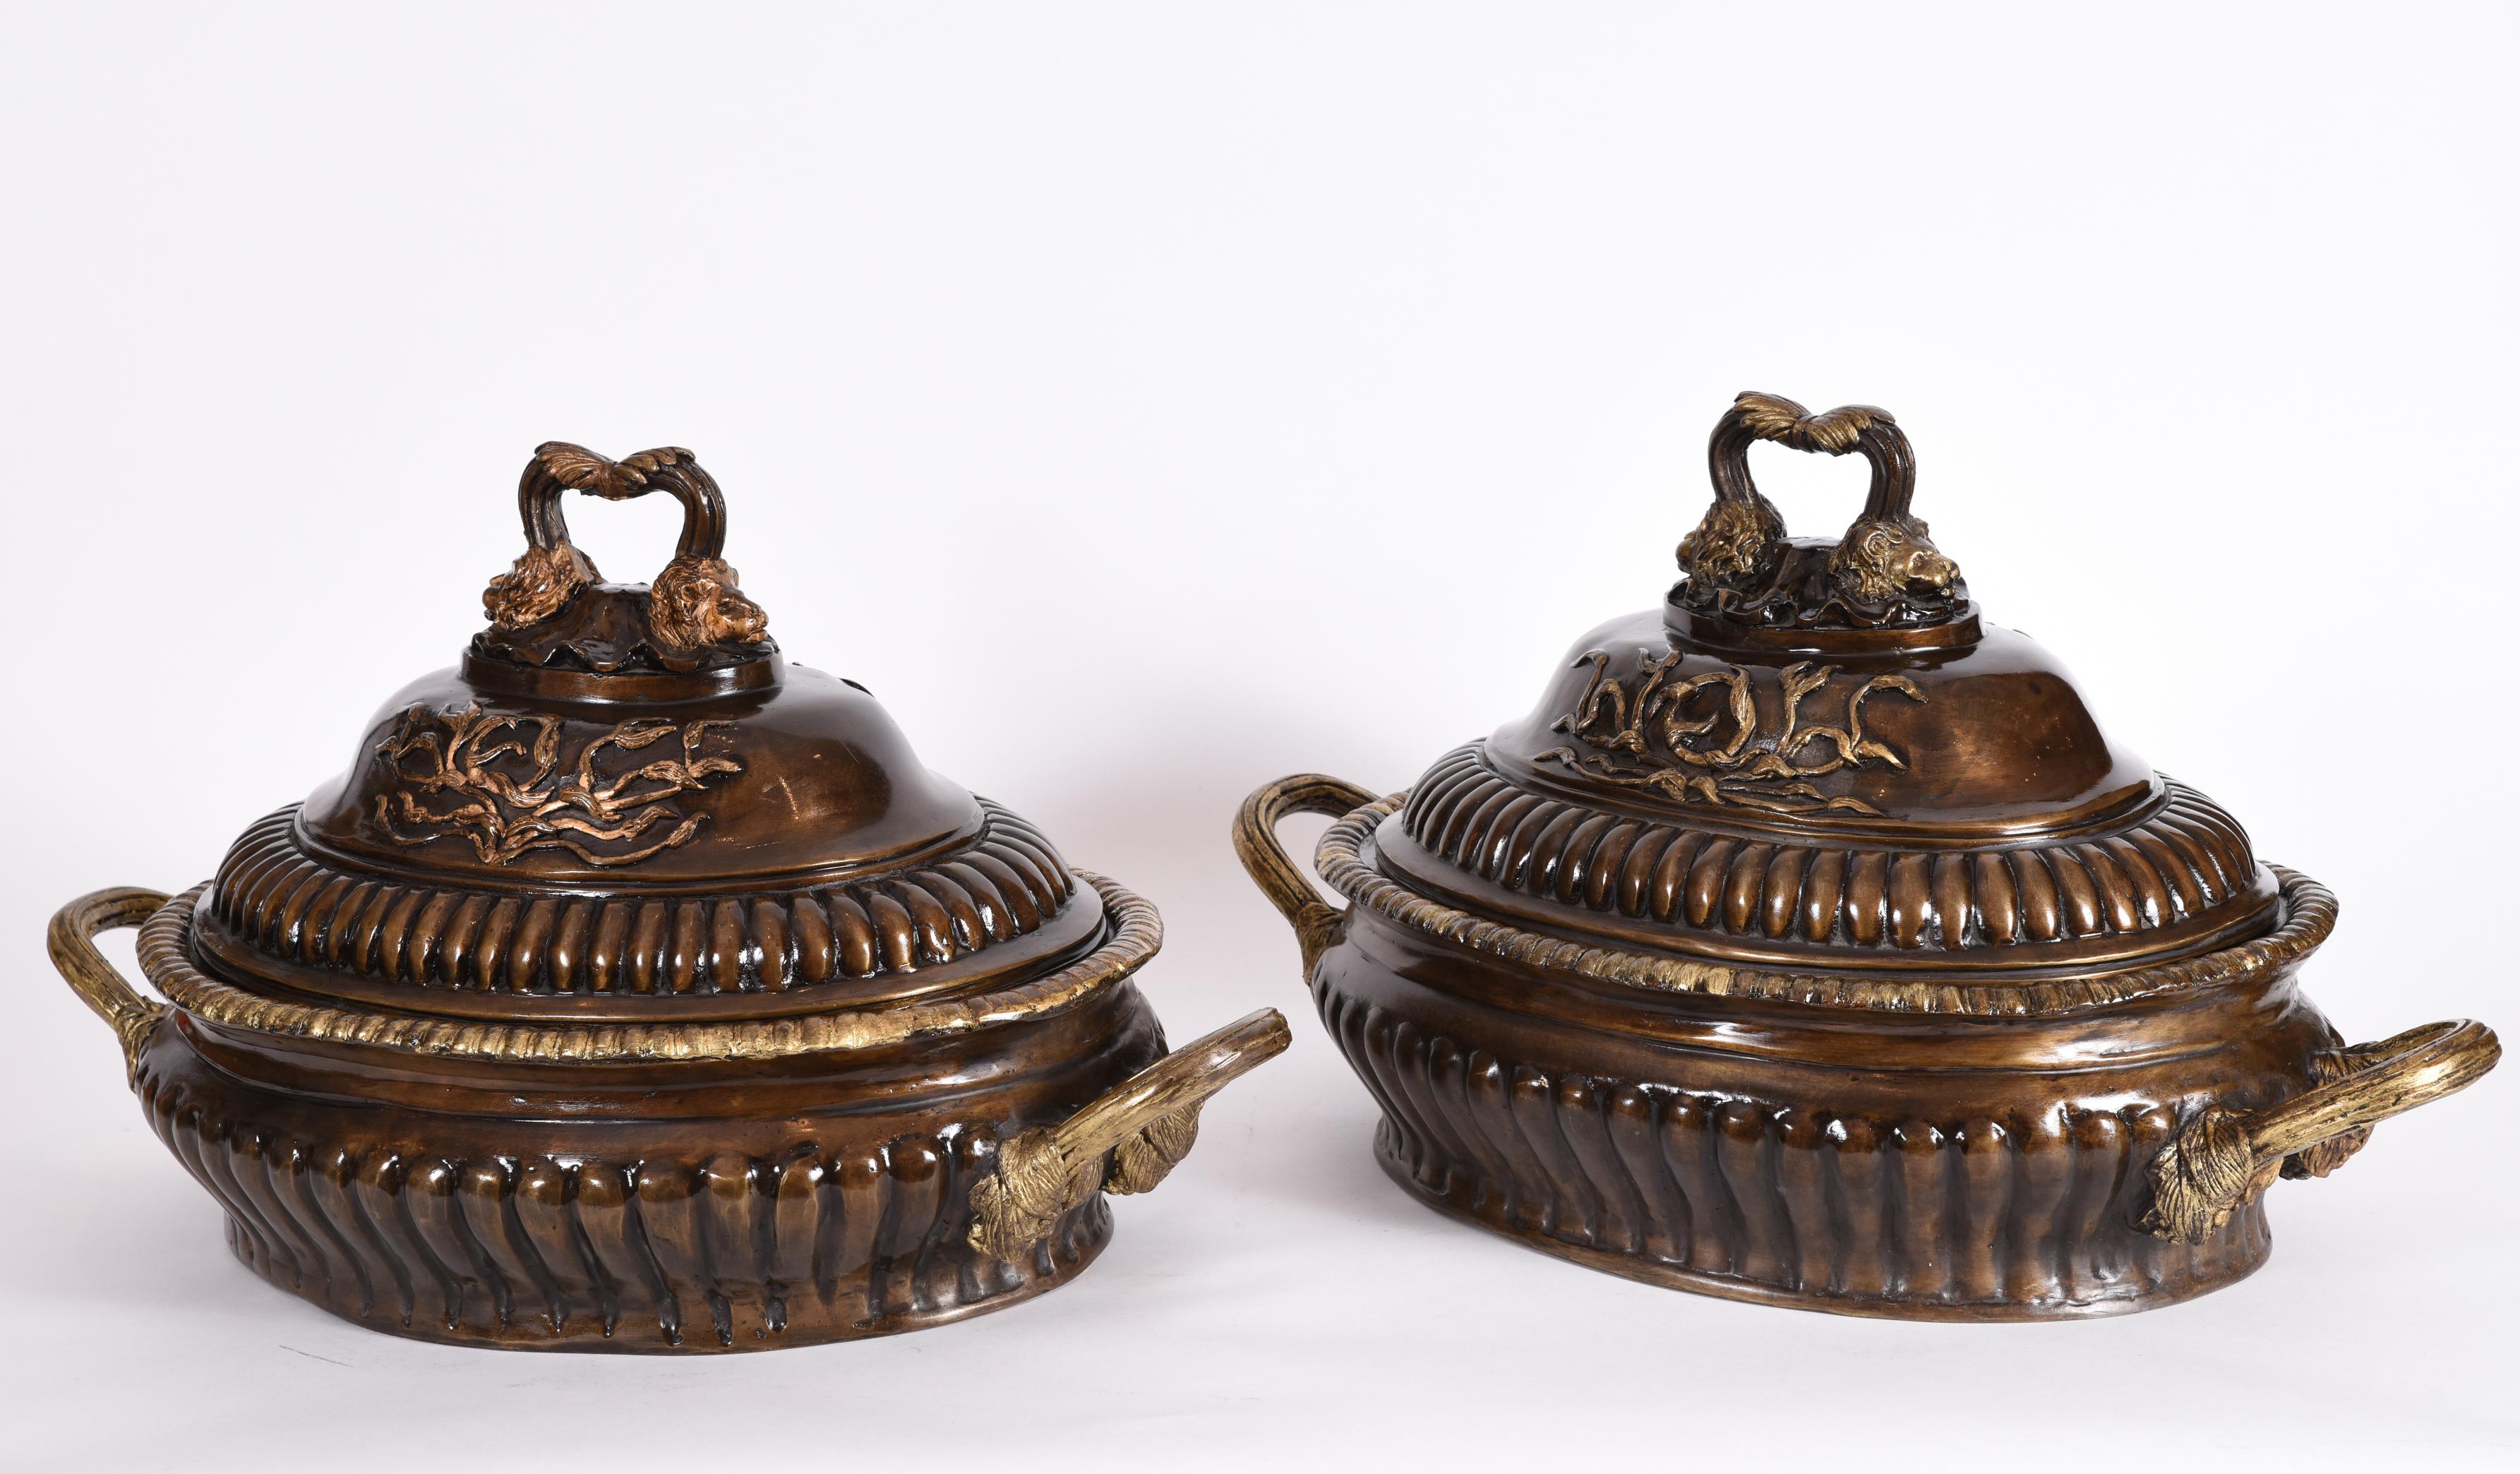 Early 20th century pair of neoclassical style patinated bronze covered tureen form tableware centerpieces. Each piece is in excellent vintage condition. These are bronze they are heavy. Each one measure about 24 inches length x 13.5 inches width x